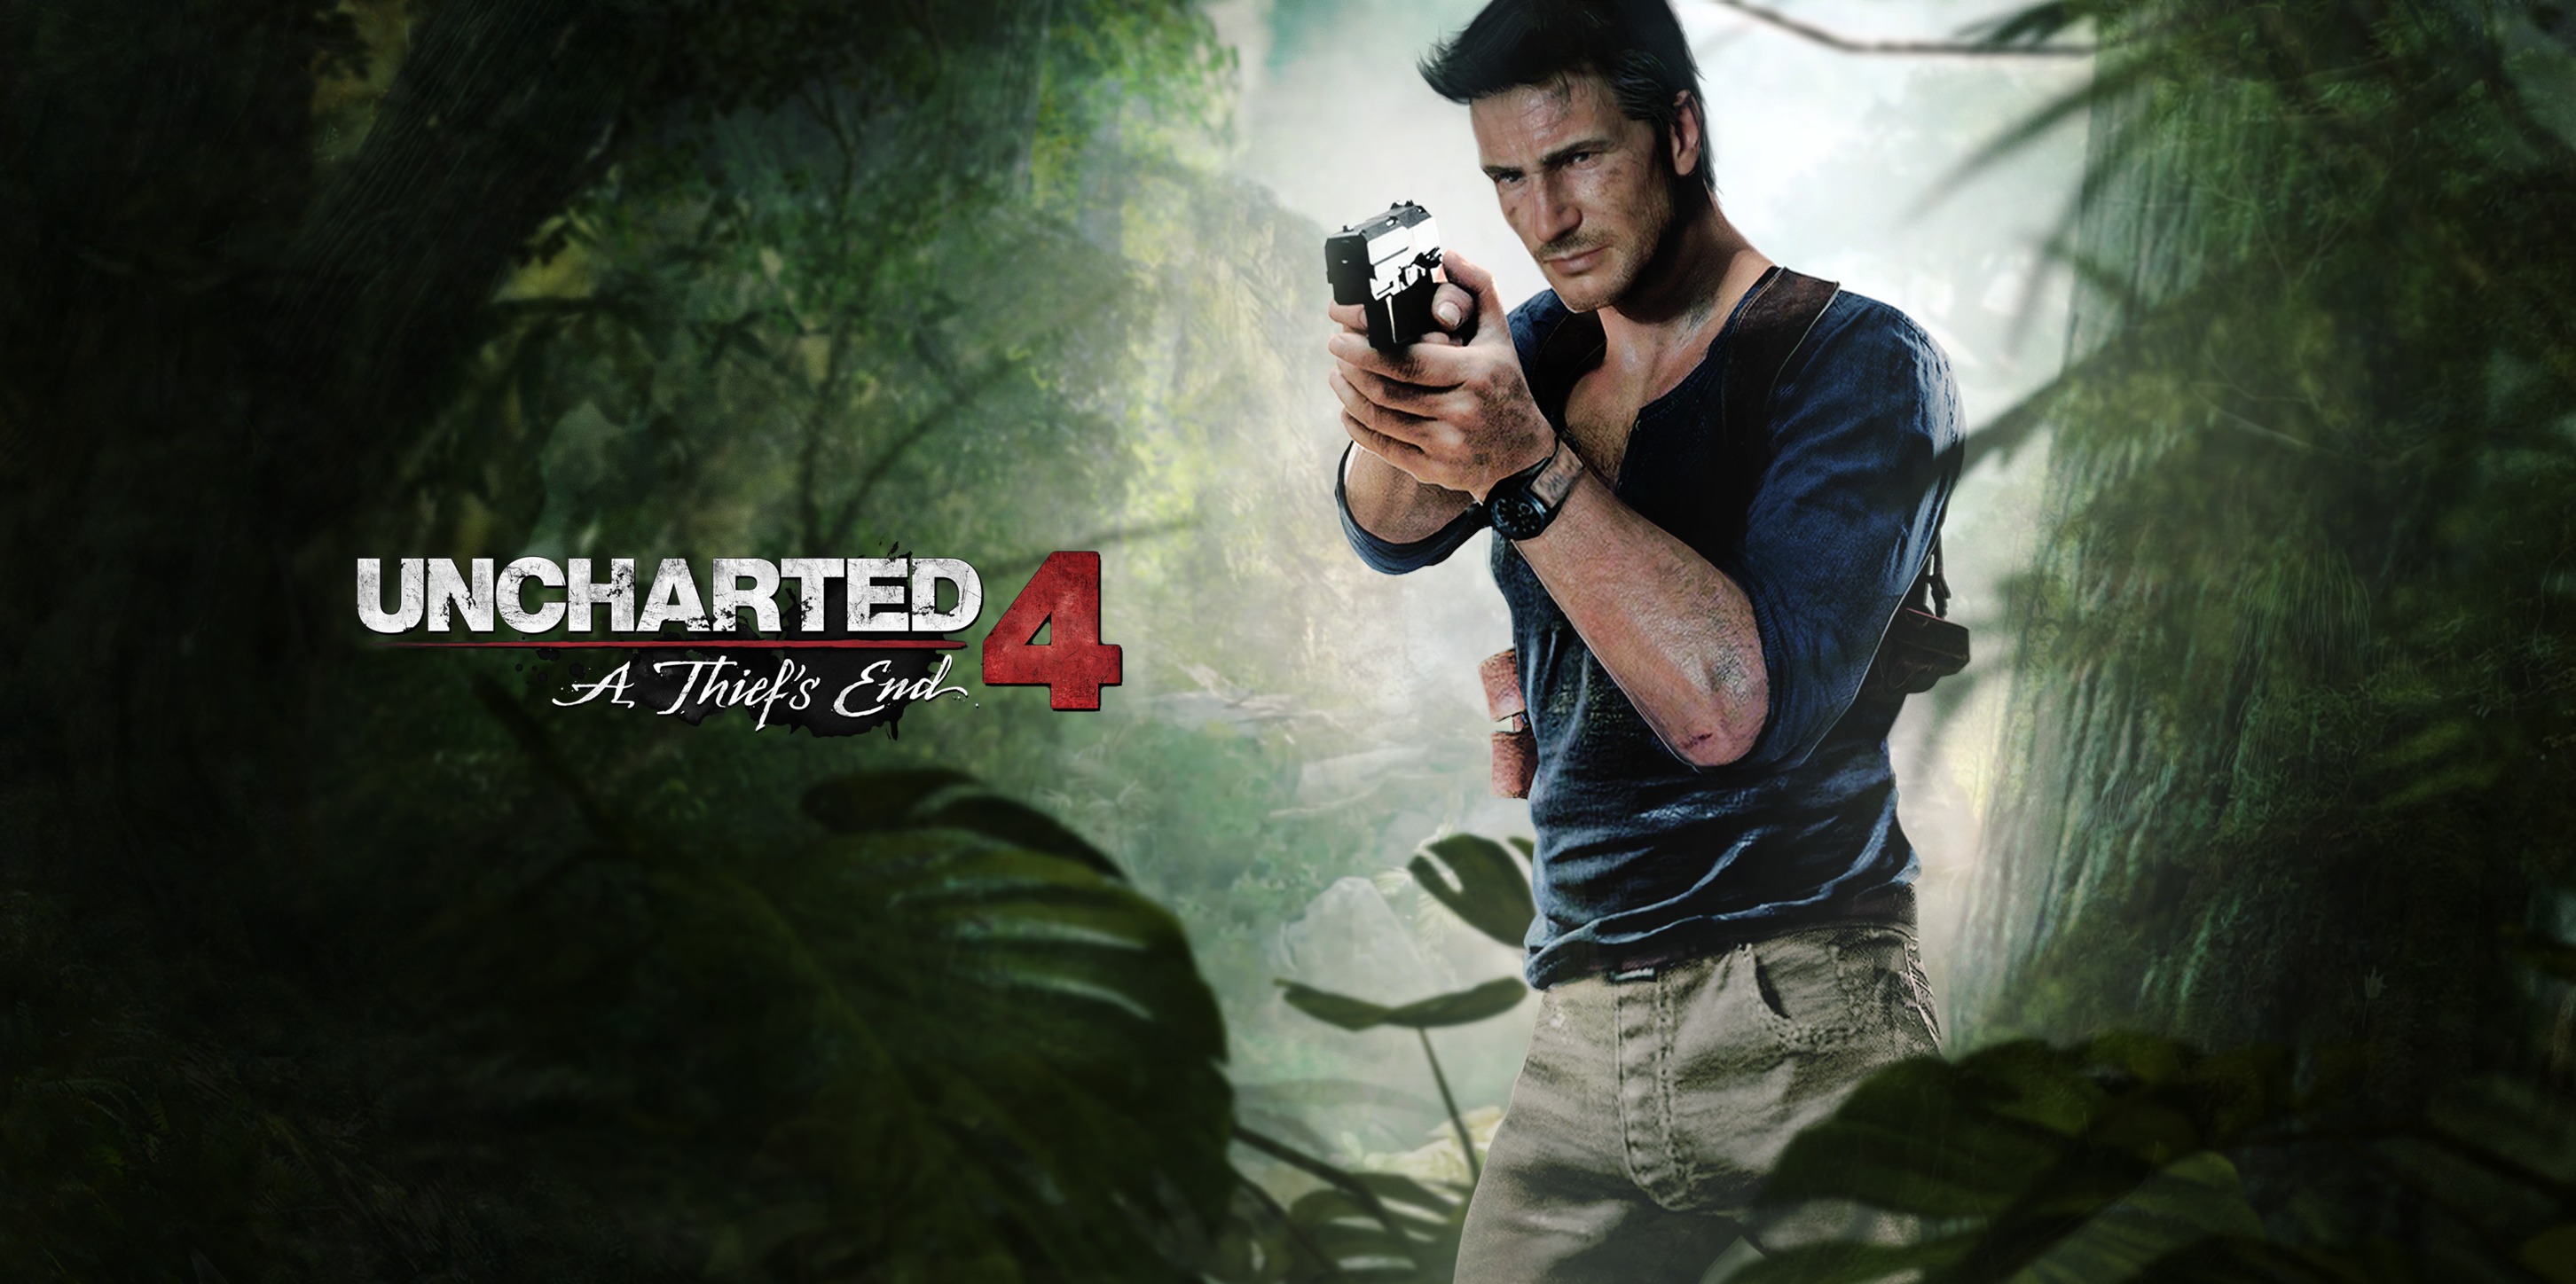 nathan drake, video game, uncharted 4: a thief's end, uncharted